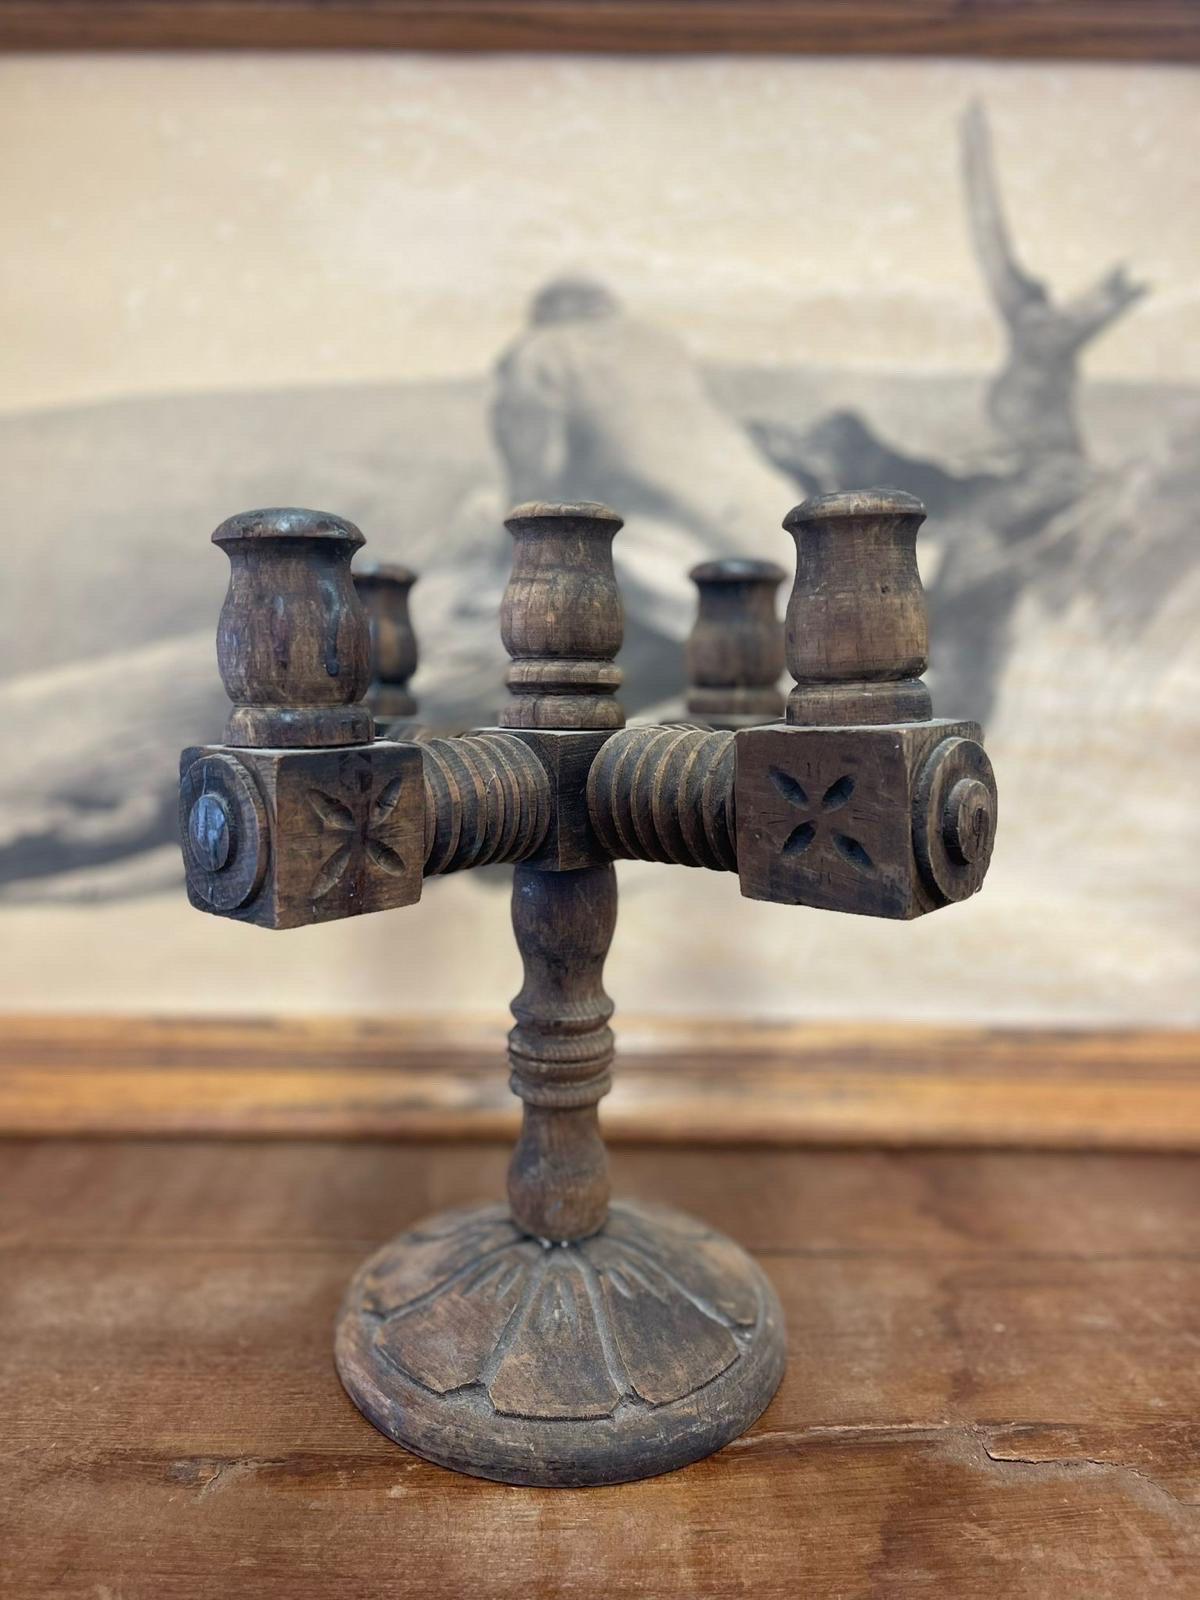 Vintage Candelabra Solid Wood, Intricate Carvings, Cover the Entire Piece. Round Base. Vintage Condition Consistent with Age as Pictured.

Dimensions. 13 1/2 W ; 13 1/2 D ; 15 H